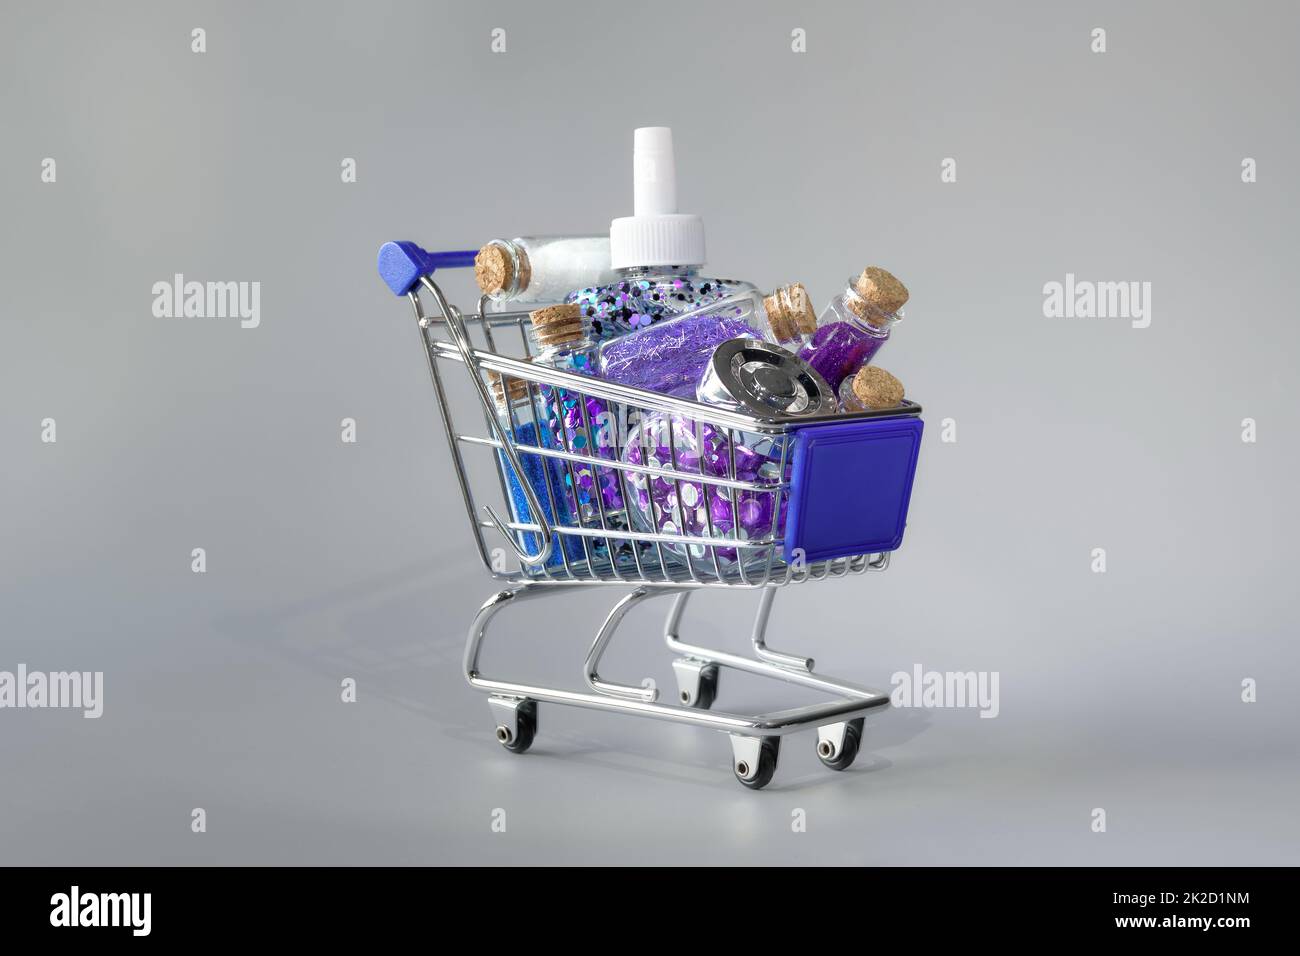 Cost of glitter products. Mini shopping cart with several glitter bottles on abstract neon blue pink background. Stock Photo